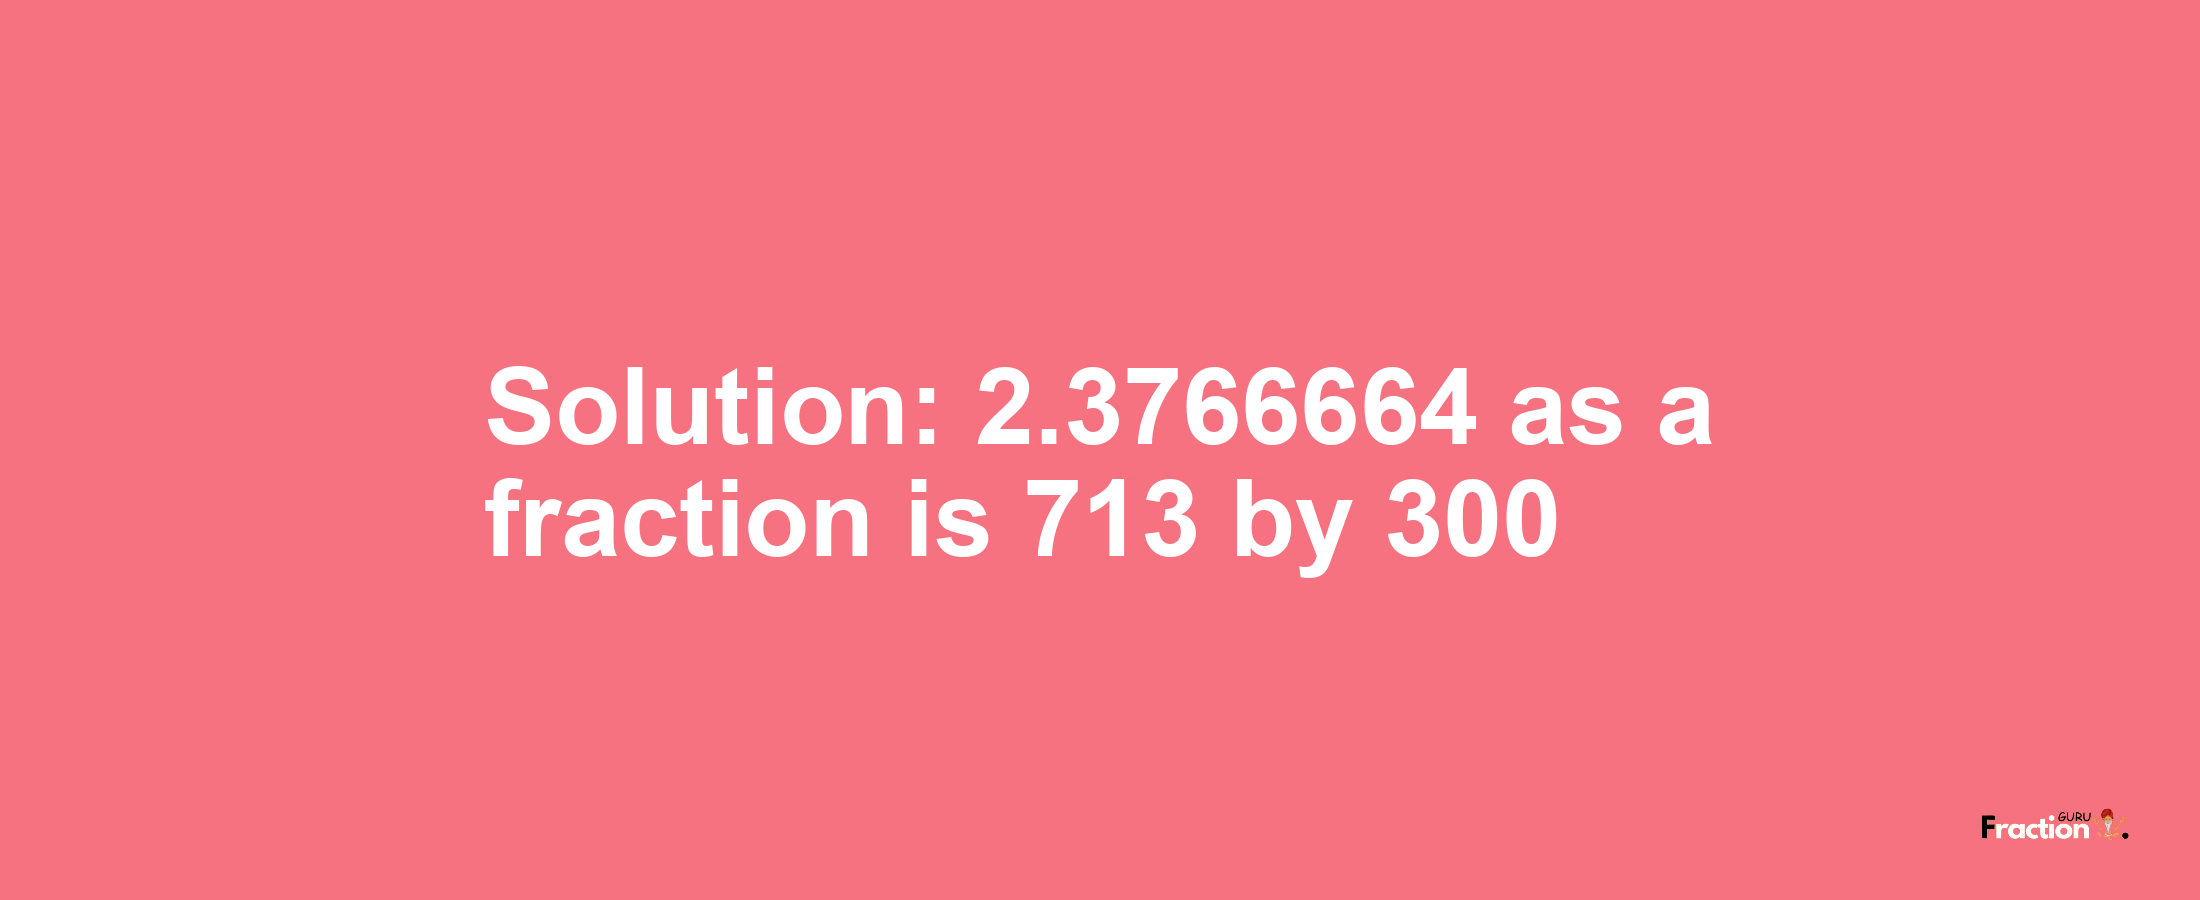 Solution:2.3766664 as a fraction is 713/300